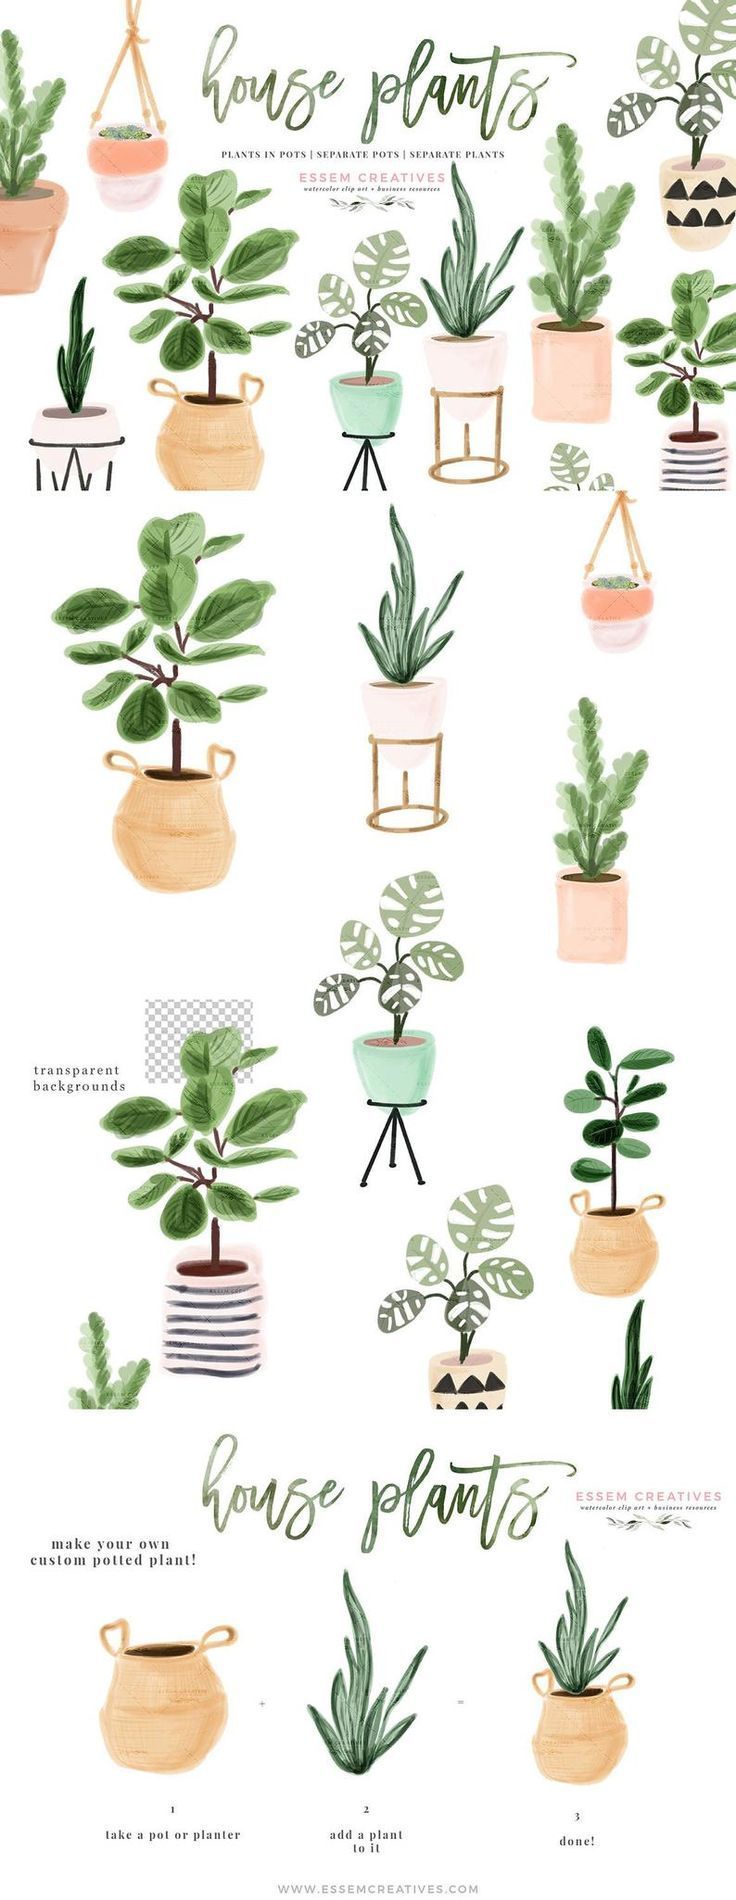 Watercolor House Plants Clip Art, Indoor Plants Potted Plant Clipart, Cactus Succulent, Ceramic Planter Fiddle Leaf Fig Monstera Rubber tree -   15 planting Indoor drawing ideas